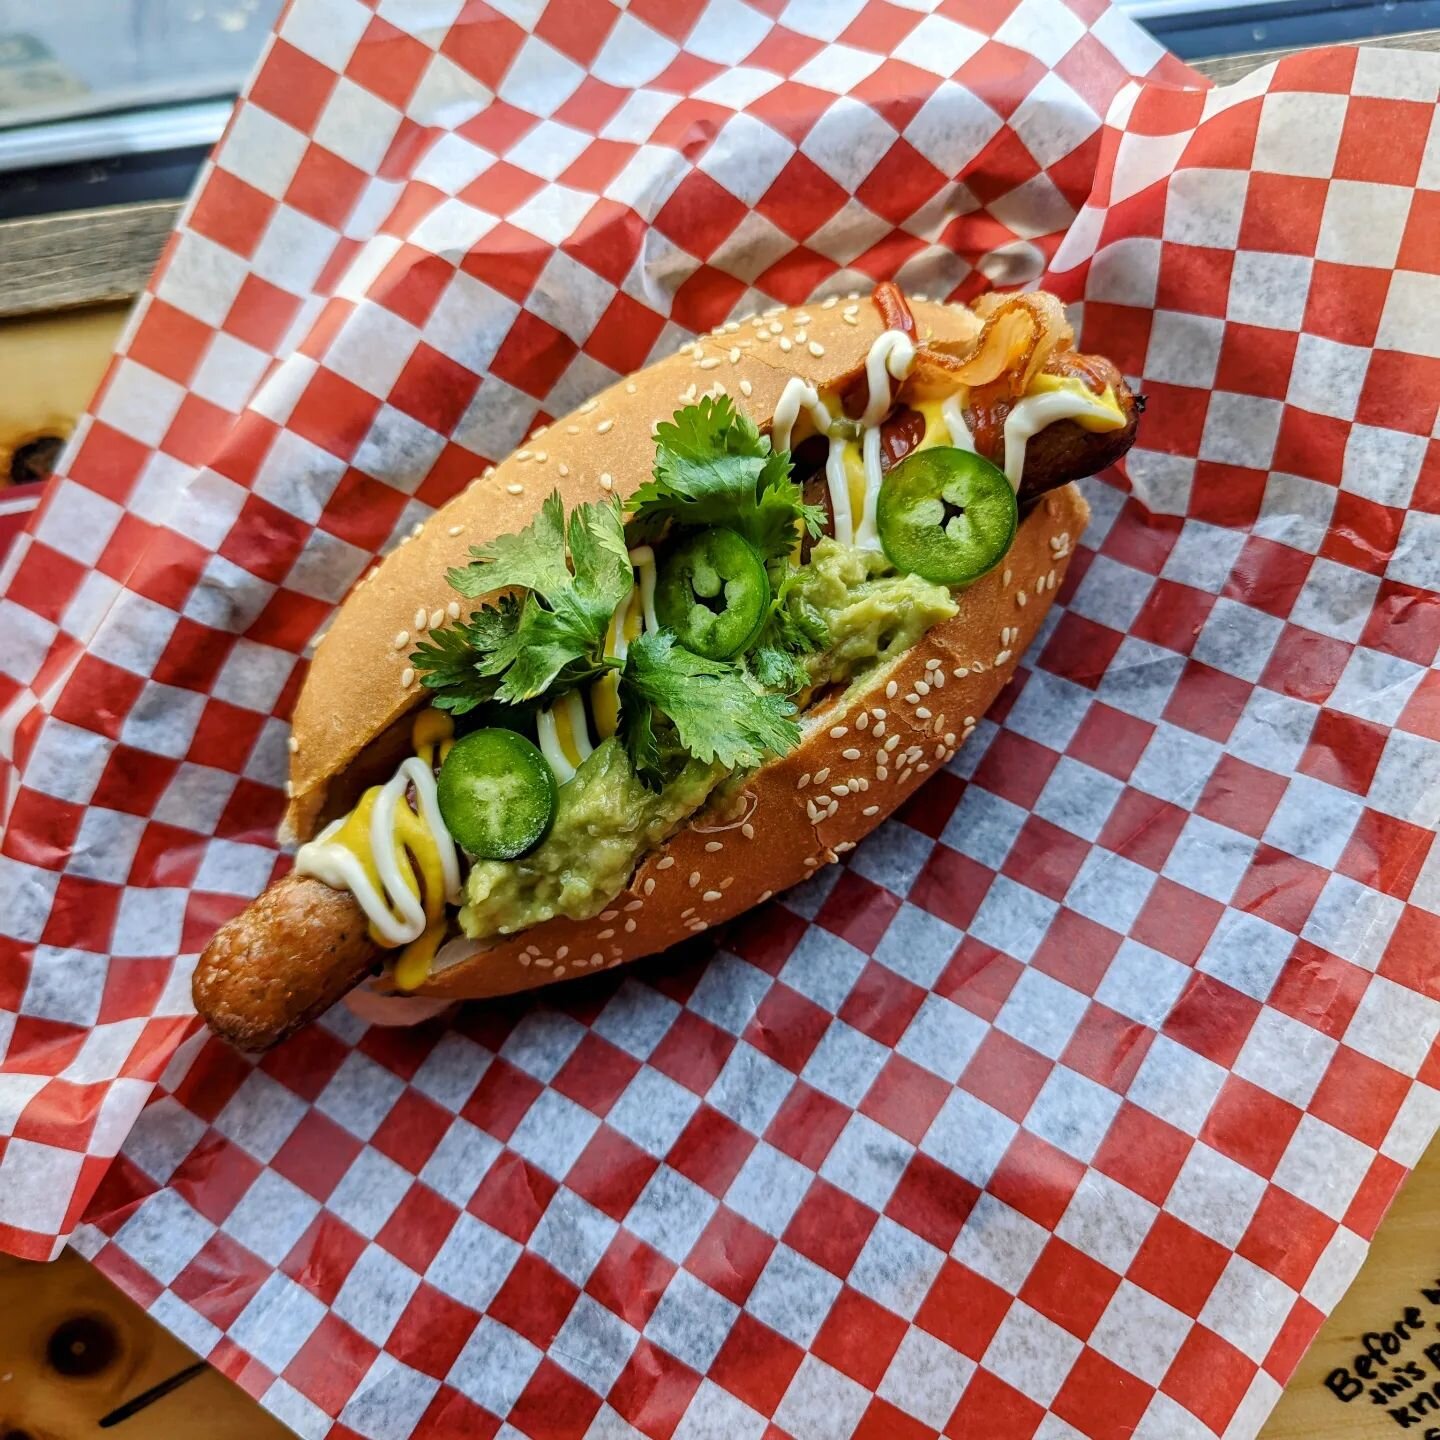 Hot dogzzz!

@chinchedmeats 

L.A. Street Dog A.K.A Danger Dog
Bacon, guac, sauteed peppers and onions, mustard, ketchup, mayo, jalapeno cilantro.

Open today from 4 til 1 am

Food until 10 pm

We also have some street corn! 

WE ALSO WANT TO GIVE YO